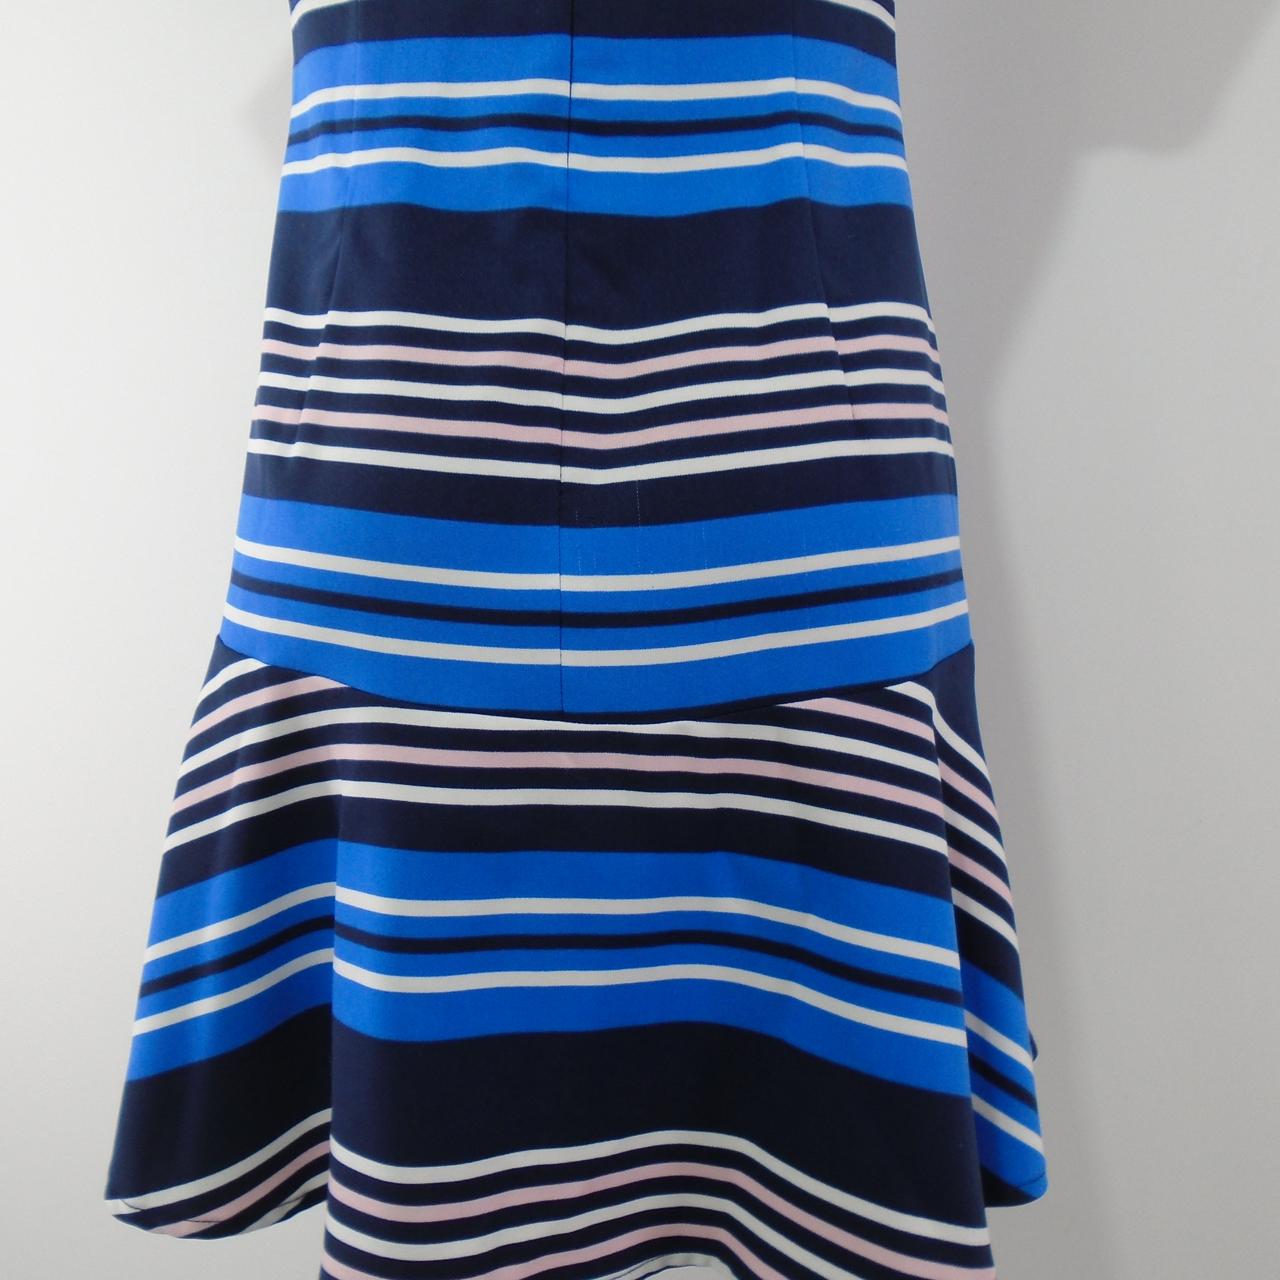 Women's Dress Tommy Hilfiger. Multicolor. S. Used. Good